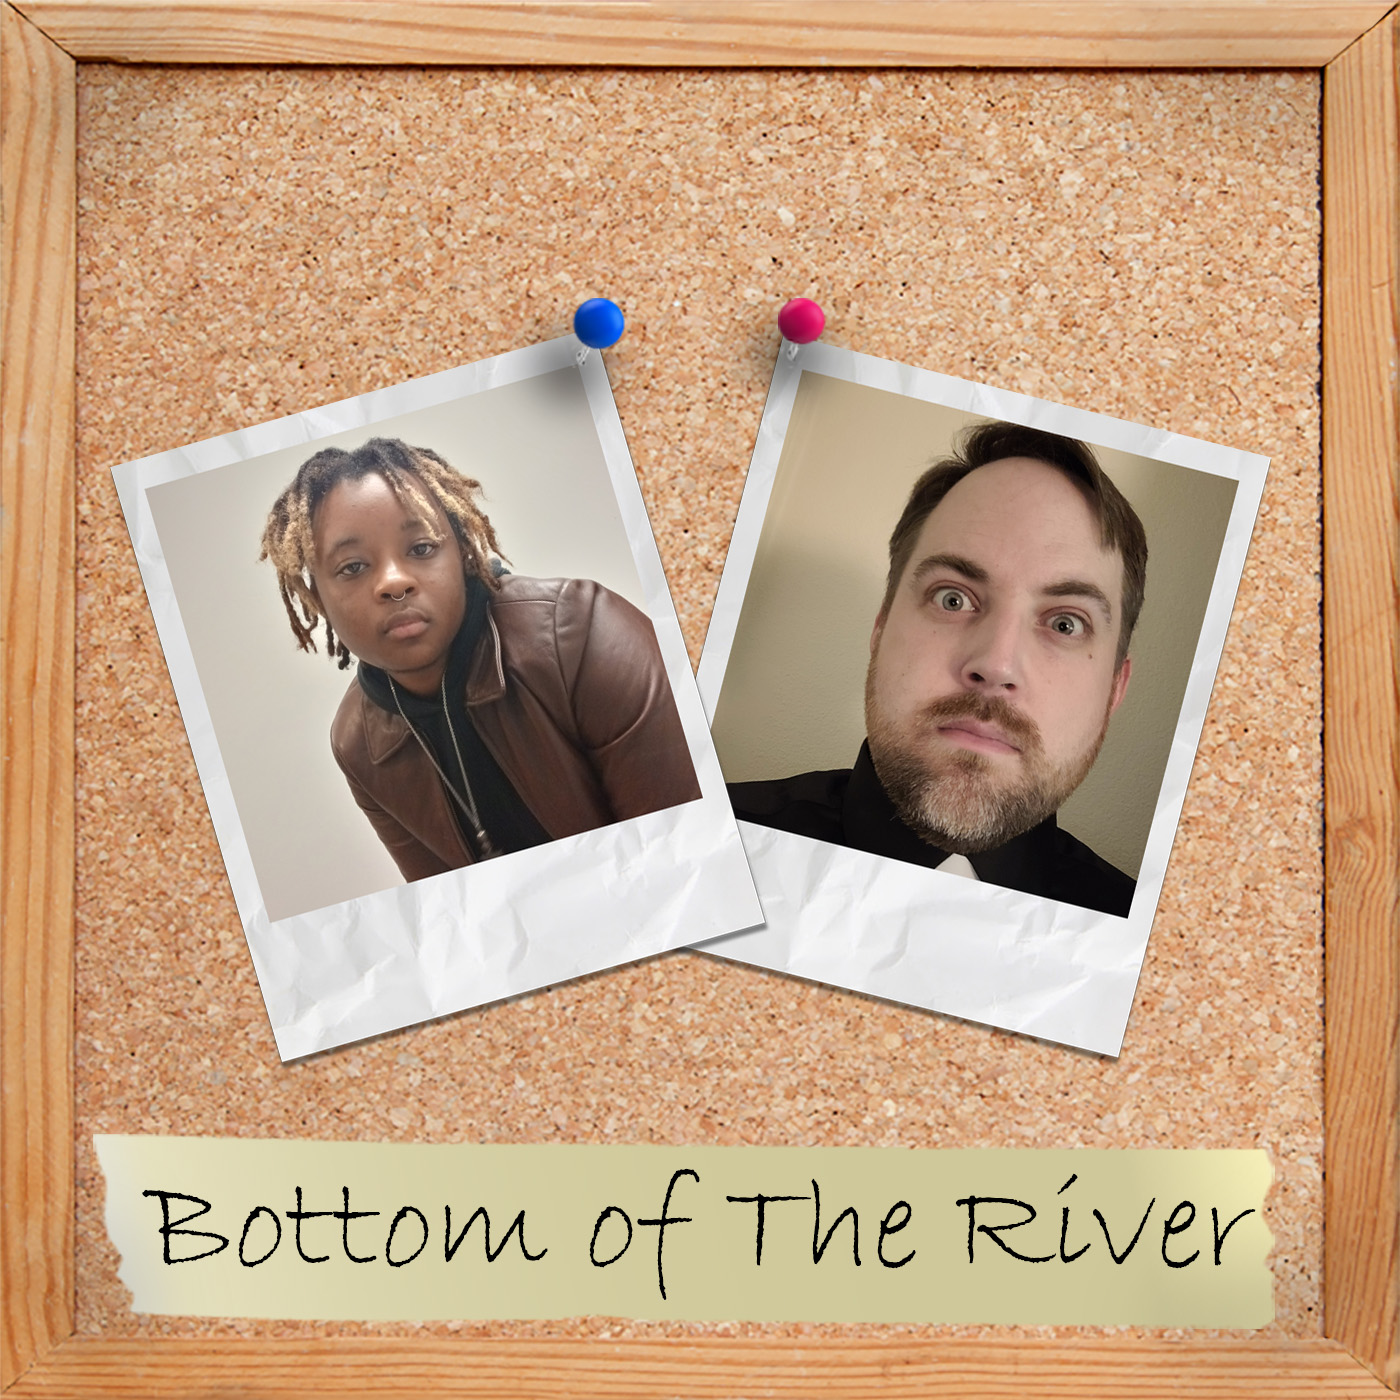 S1 Ep3: Bottom of the River